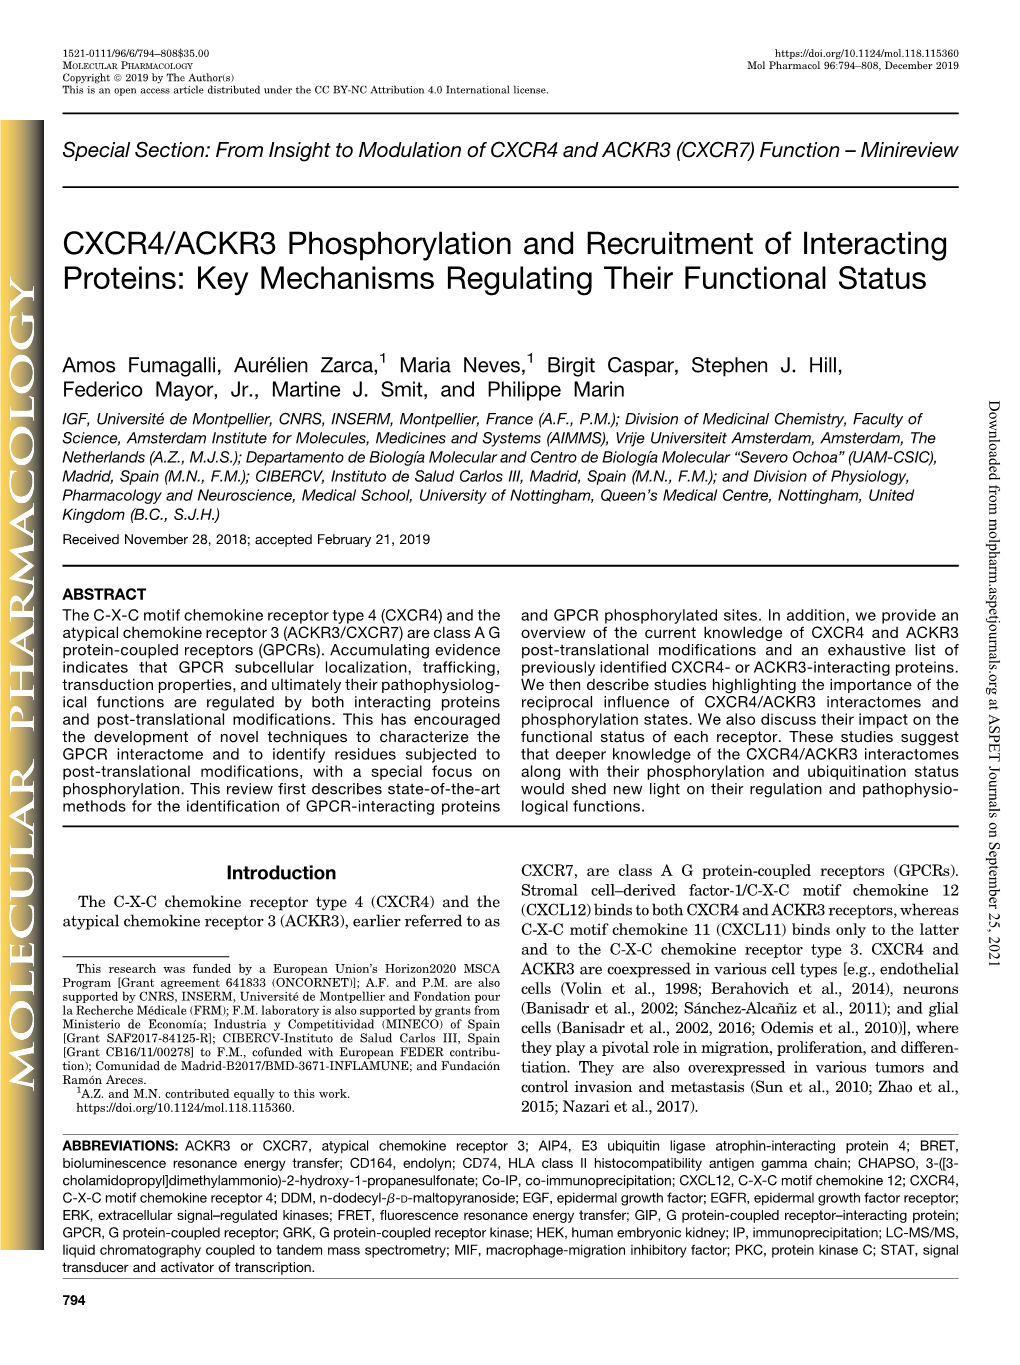 CXCR4/ACKR3 Phosphorylation and Recruitment of Interacting Proteins: Key Mechanisms Regulating Their Functional Status